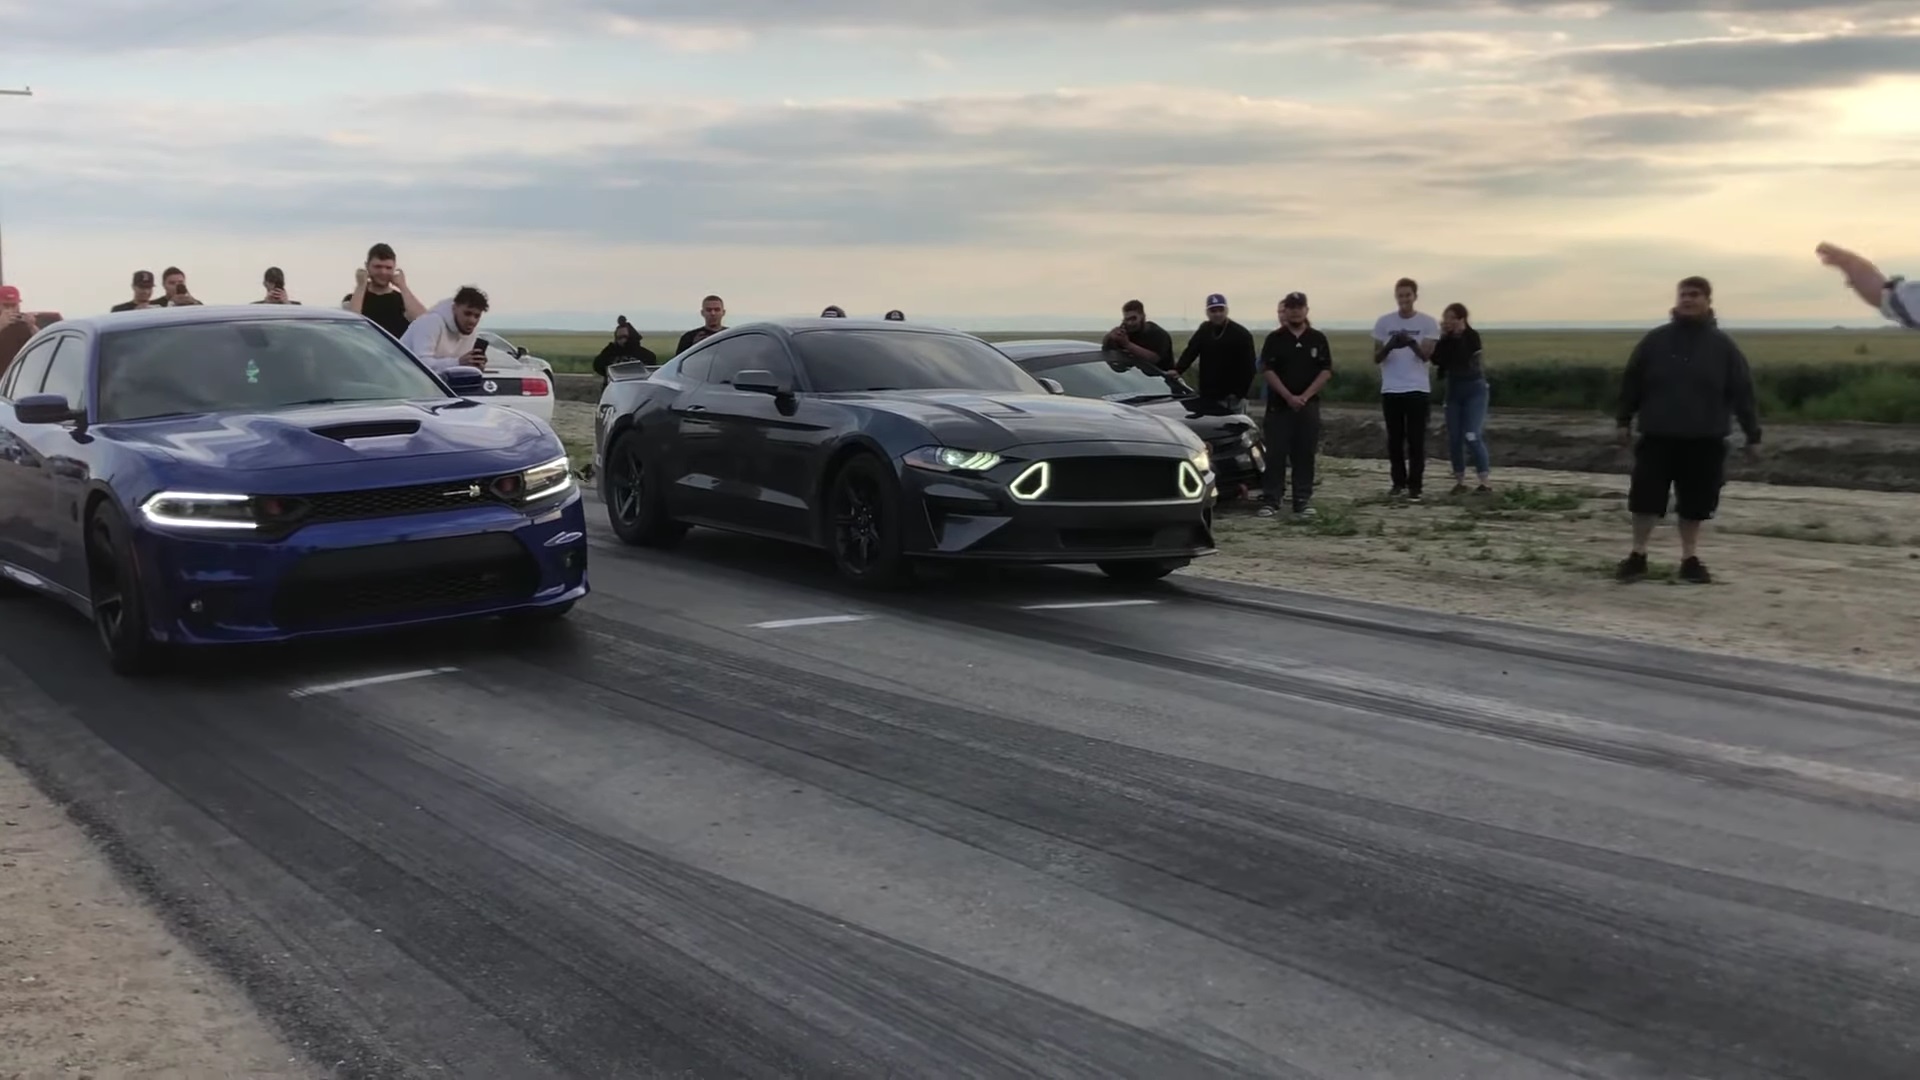 2019 Mustang GT vs 2019 Charger Scatpack